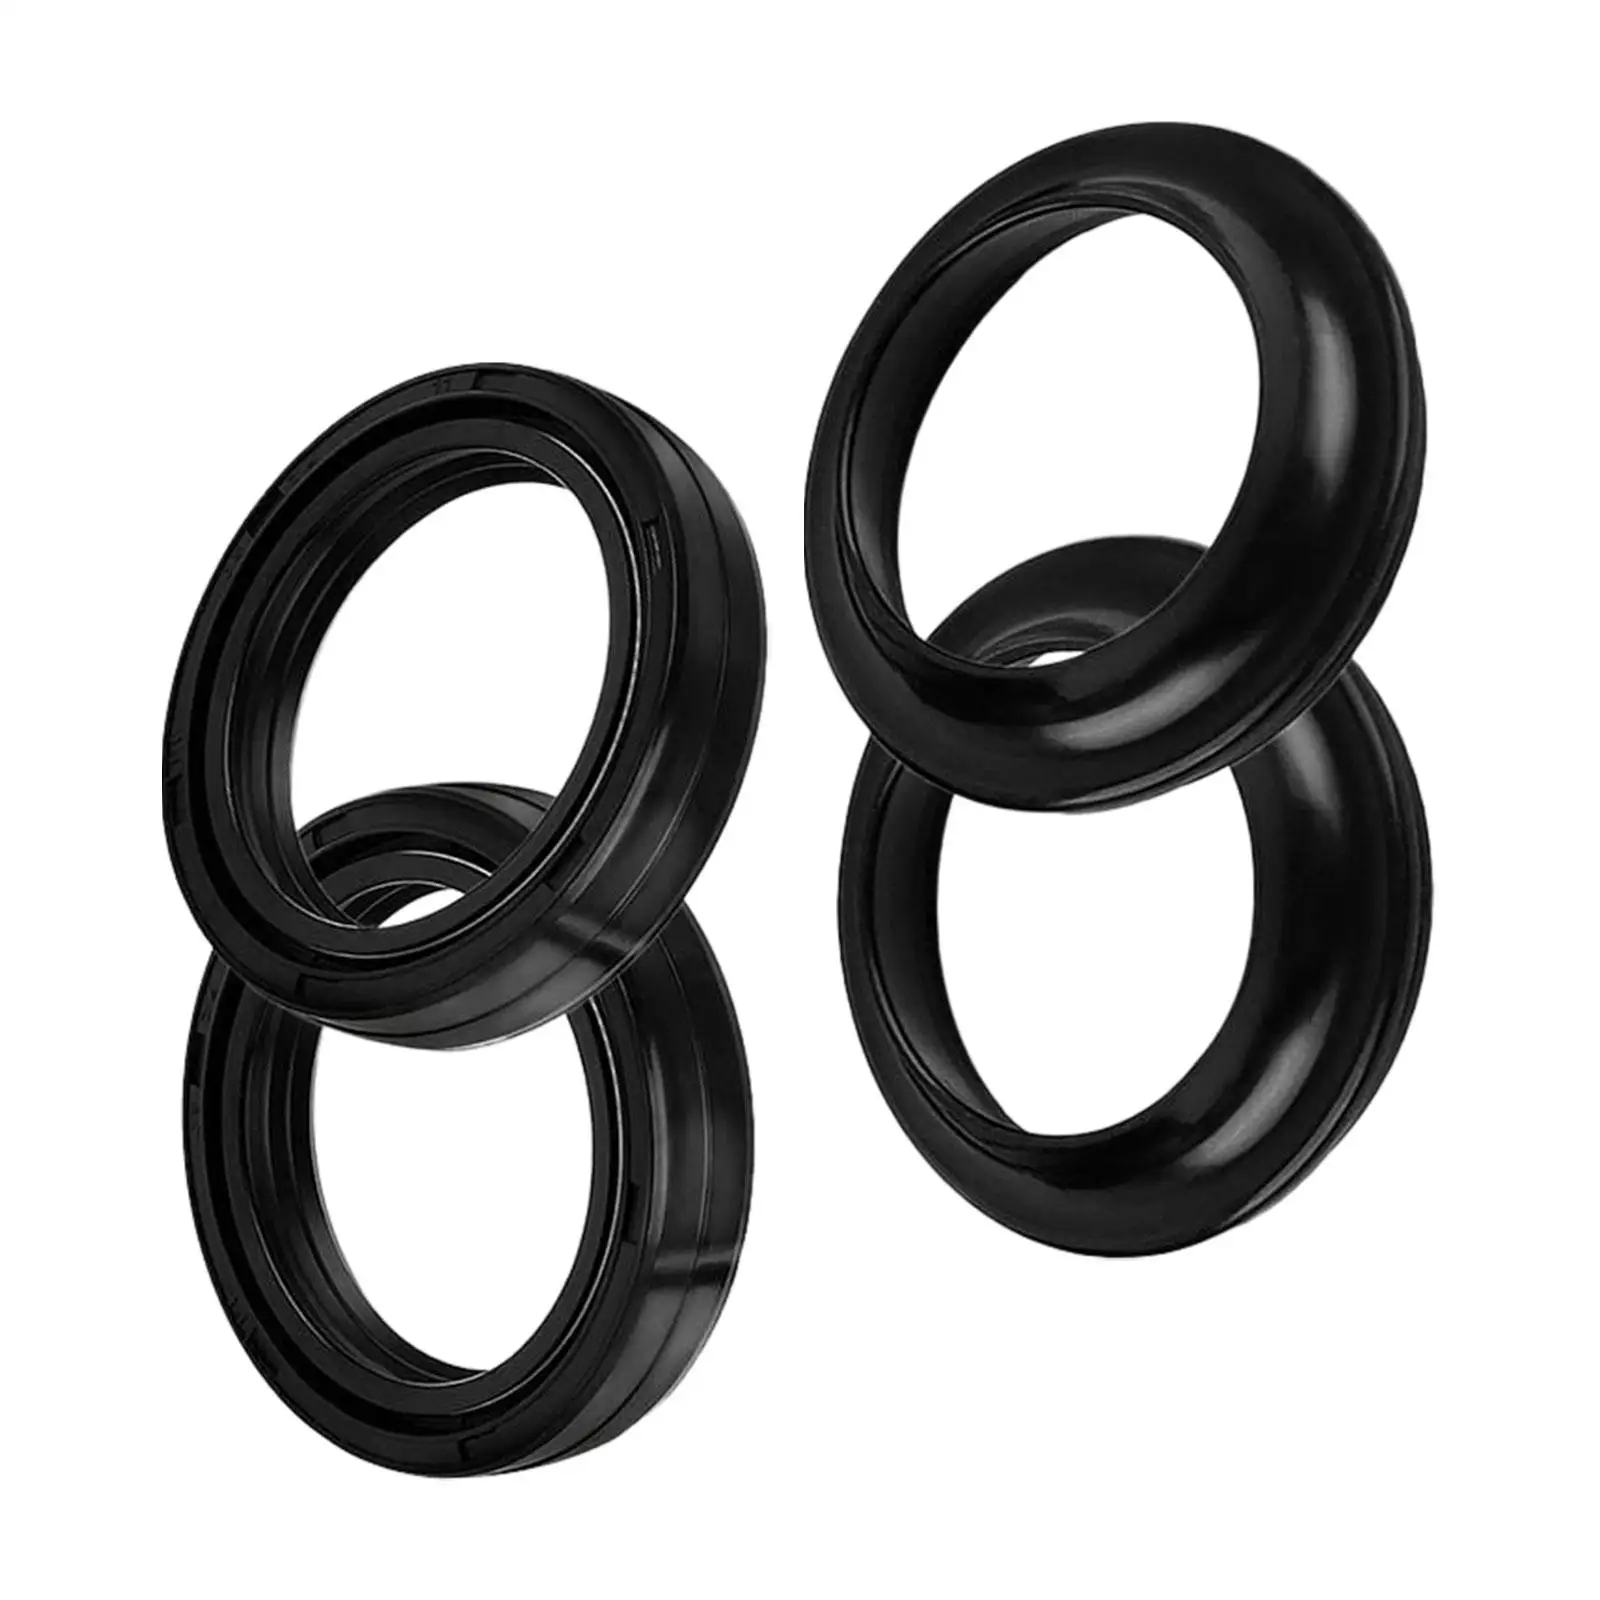 4x Motorcycle Front Fork Damper Oil Seal and Dust Seal Premium 39x52x11mm for Harley XL883N XL1200T Xlh883R XL1200C XL1200L